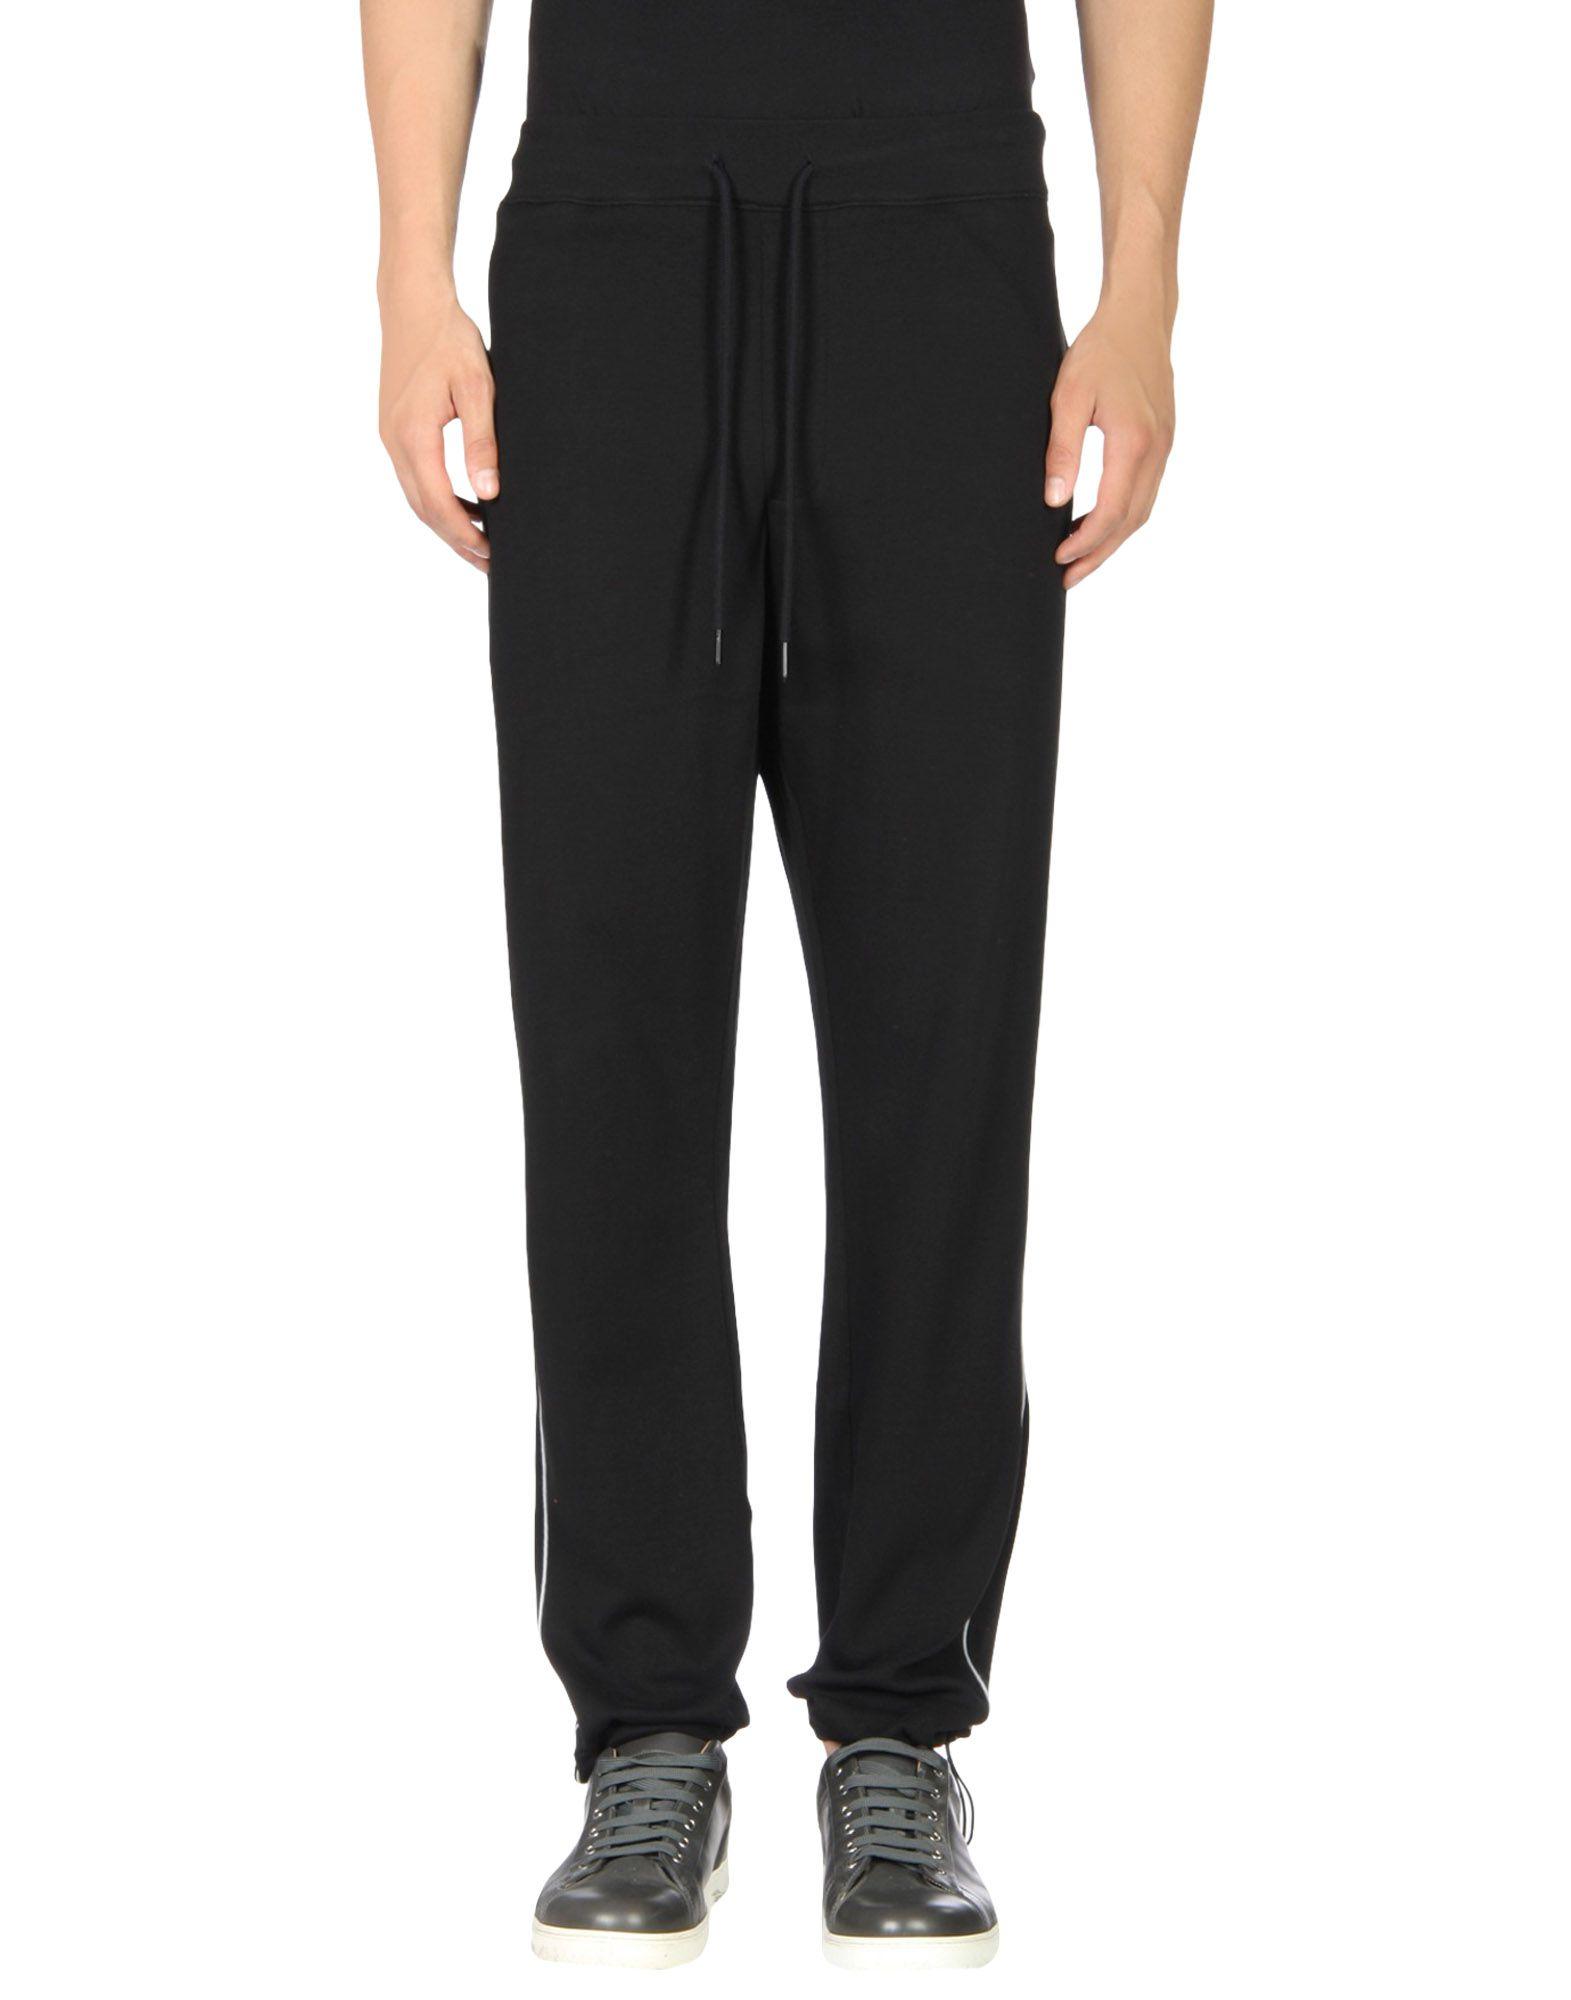 Armani Exchange Cotton Casual Pants in Black for Men - Lyst